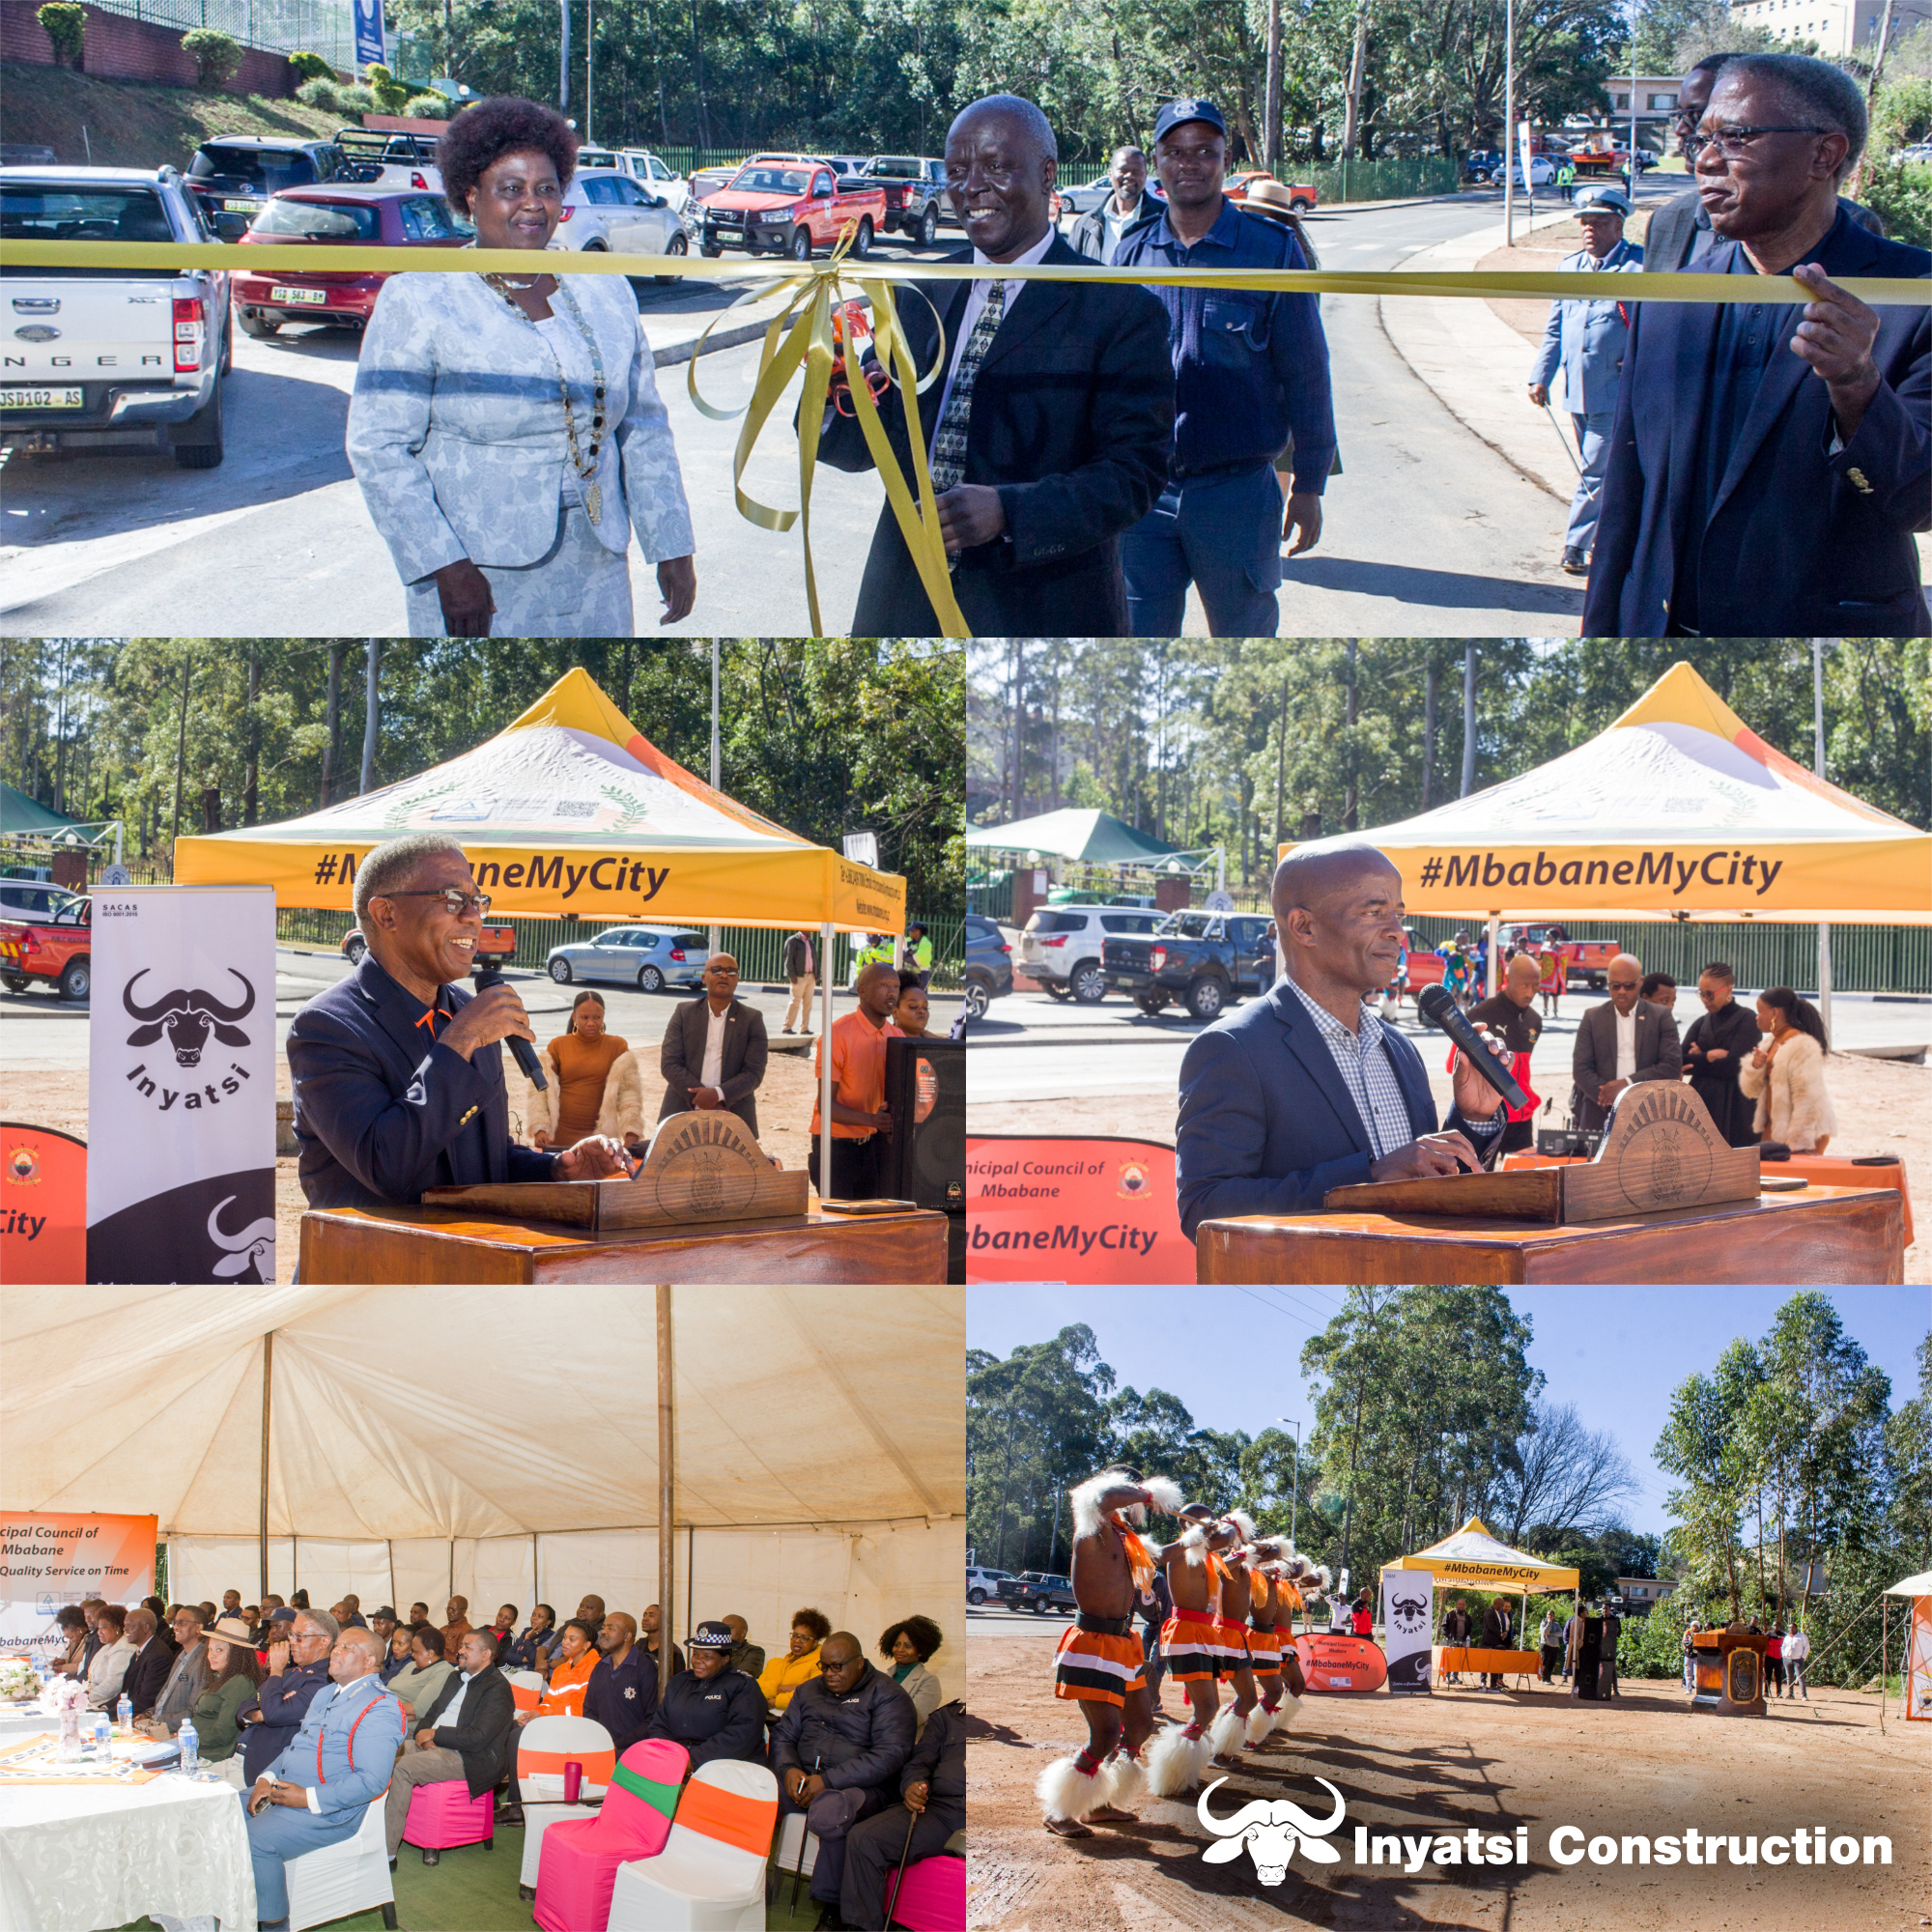 Inyatsi Construction hands over the Makhosini Drive to the Municipal Council of Mbabane